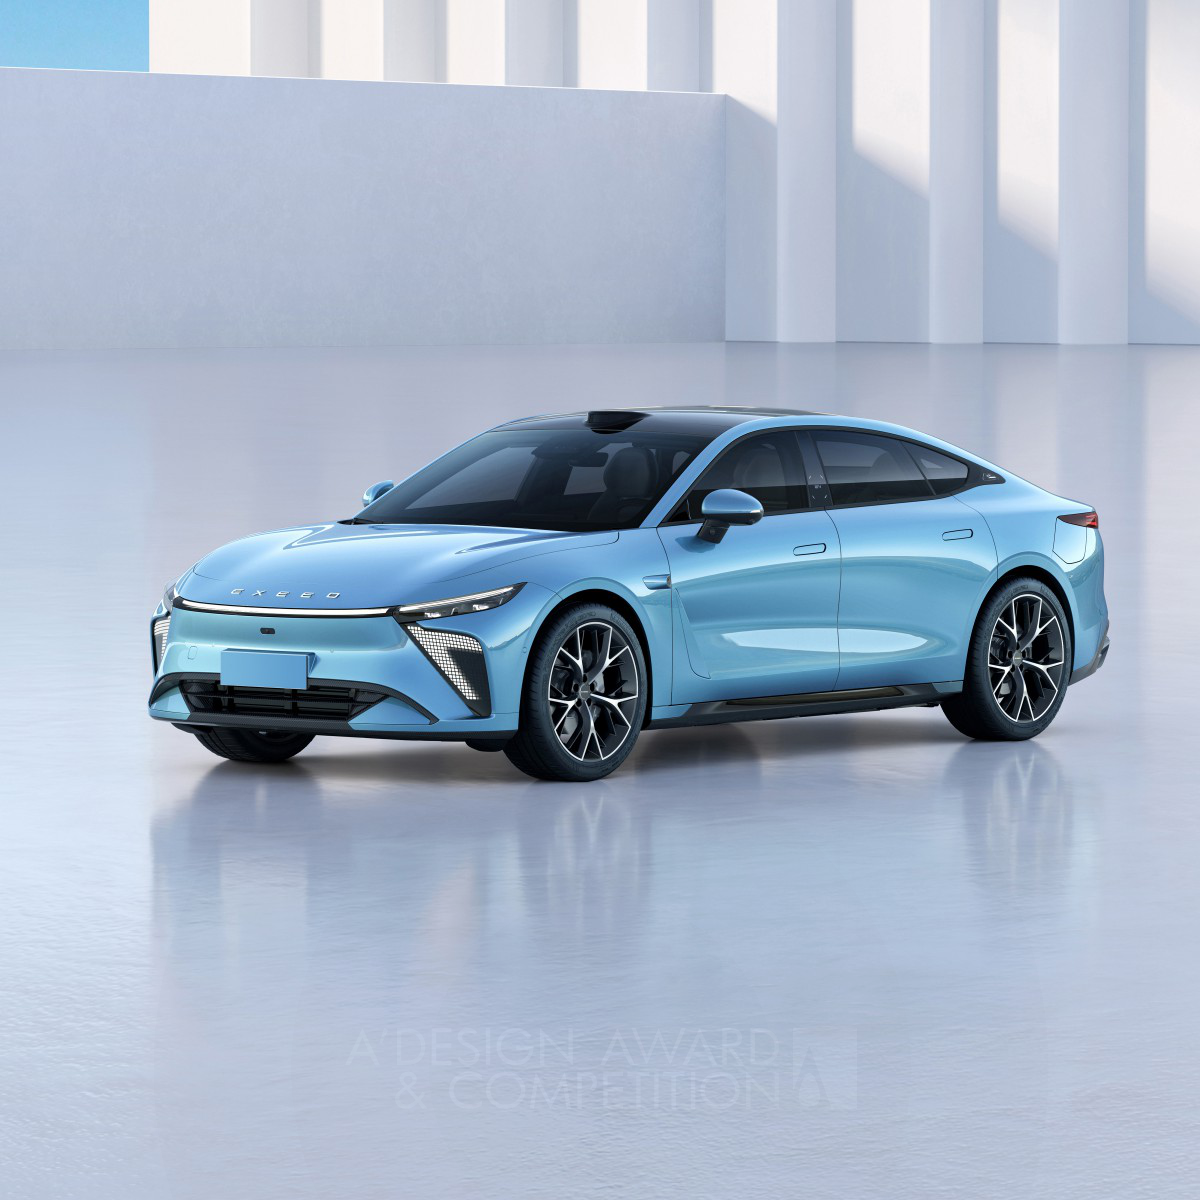 Exeed Es Electric Vehicle by Chery Automobile Co., Ltd. Platinum Car and Land Based Motor Vehicles Design Award Winner 2024 